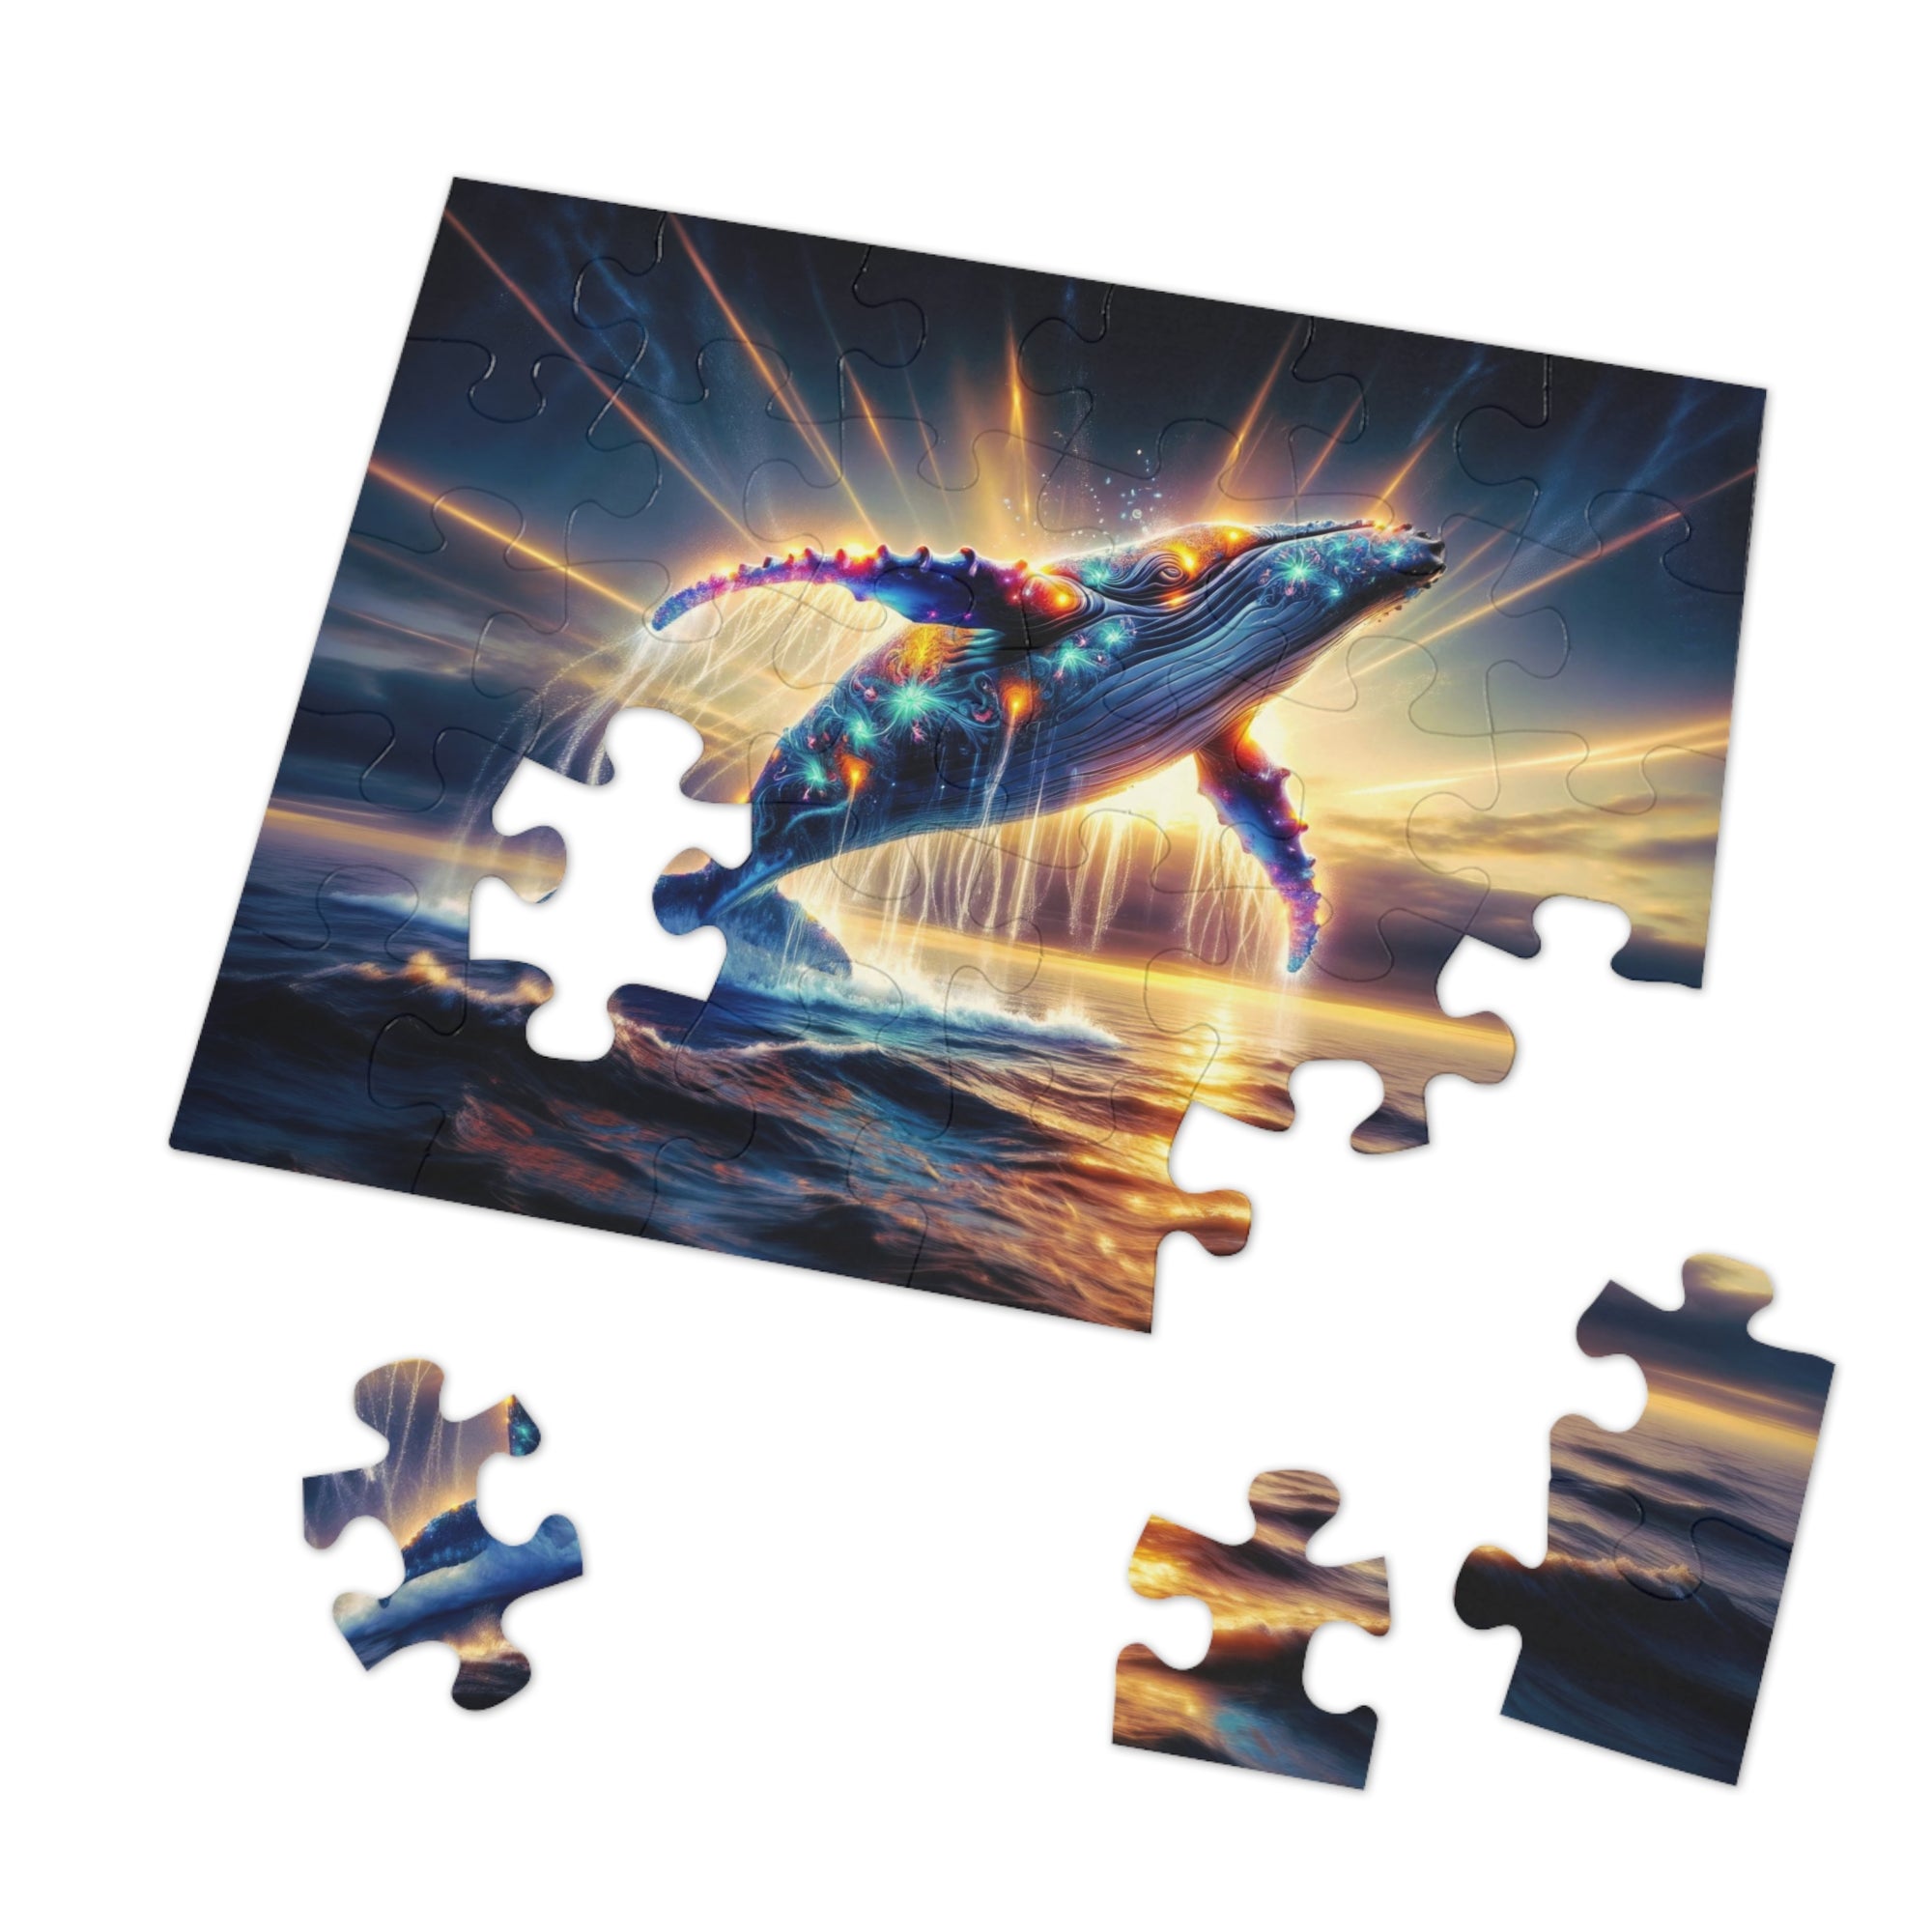 Quantum Leap of the Neon Whale Jigsaw Puzzle